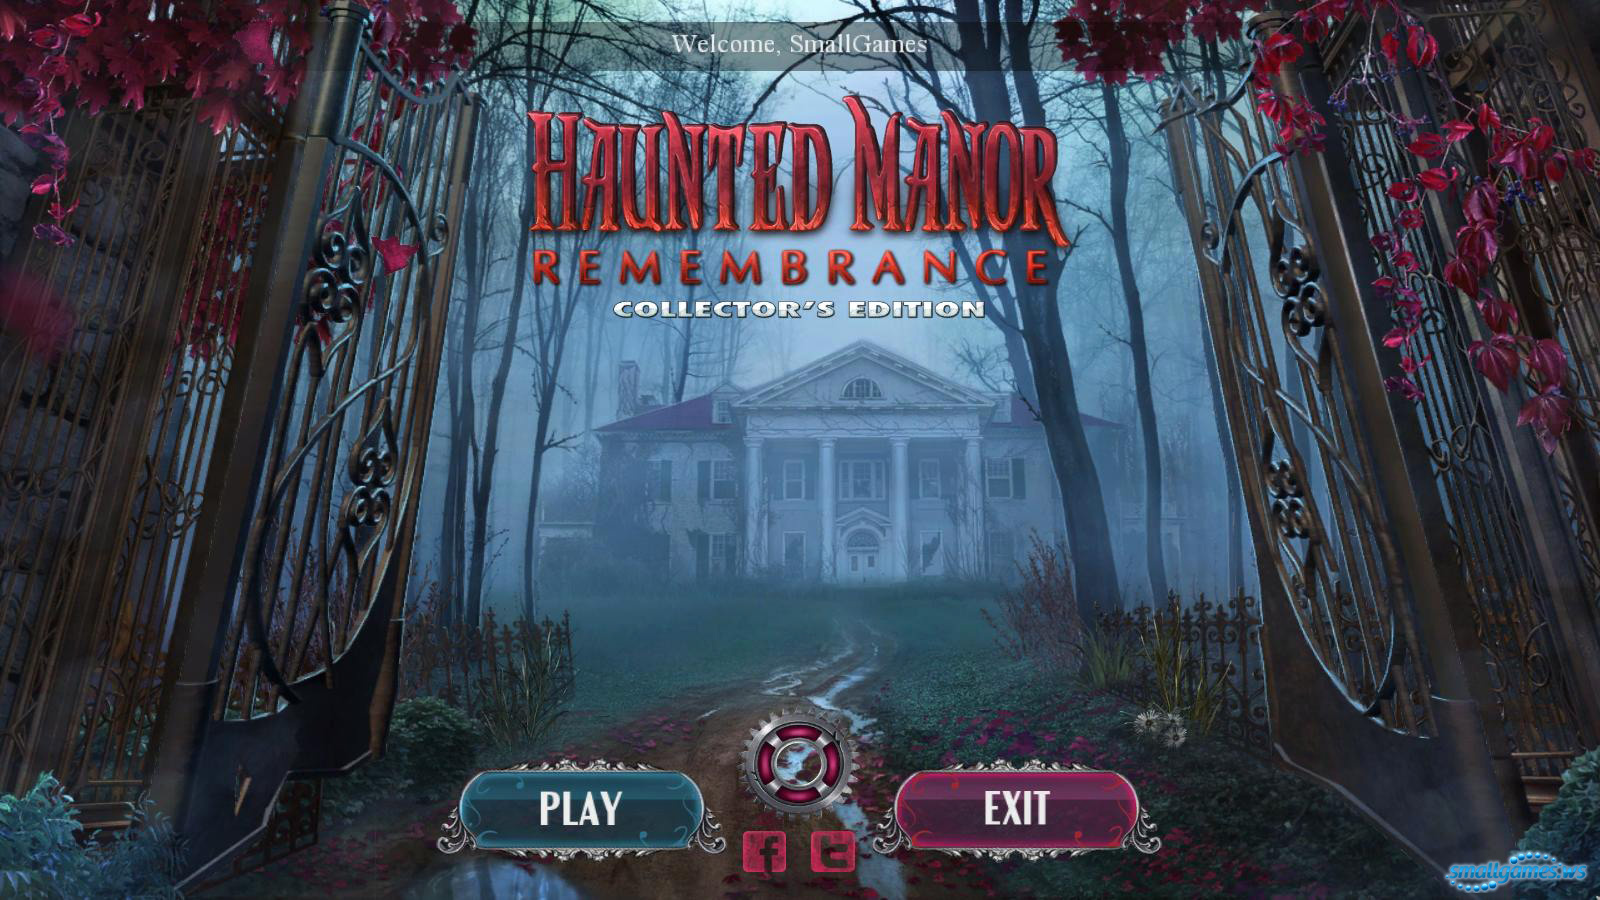 Haunted Manor 6: Remembrance Collector'S Edition - Скачать Игру.